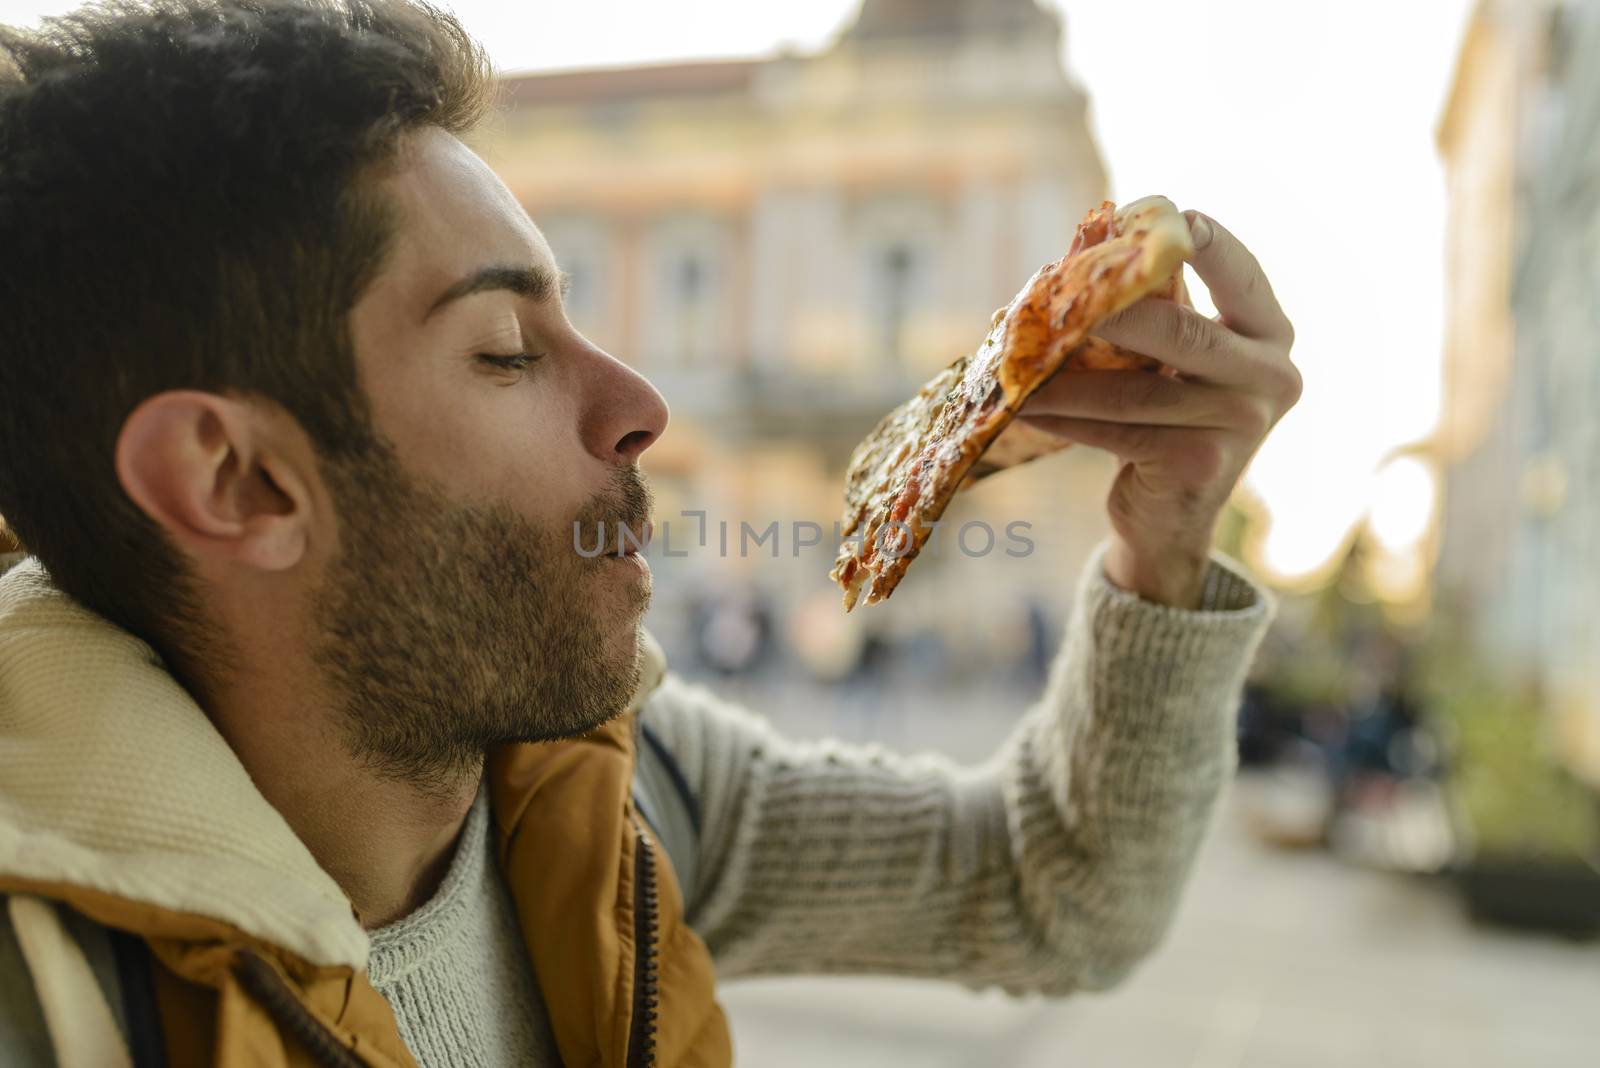 Handsome bearded young man with orange jacket eating pizza in the city street